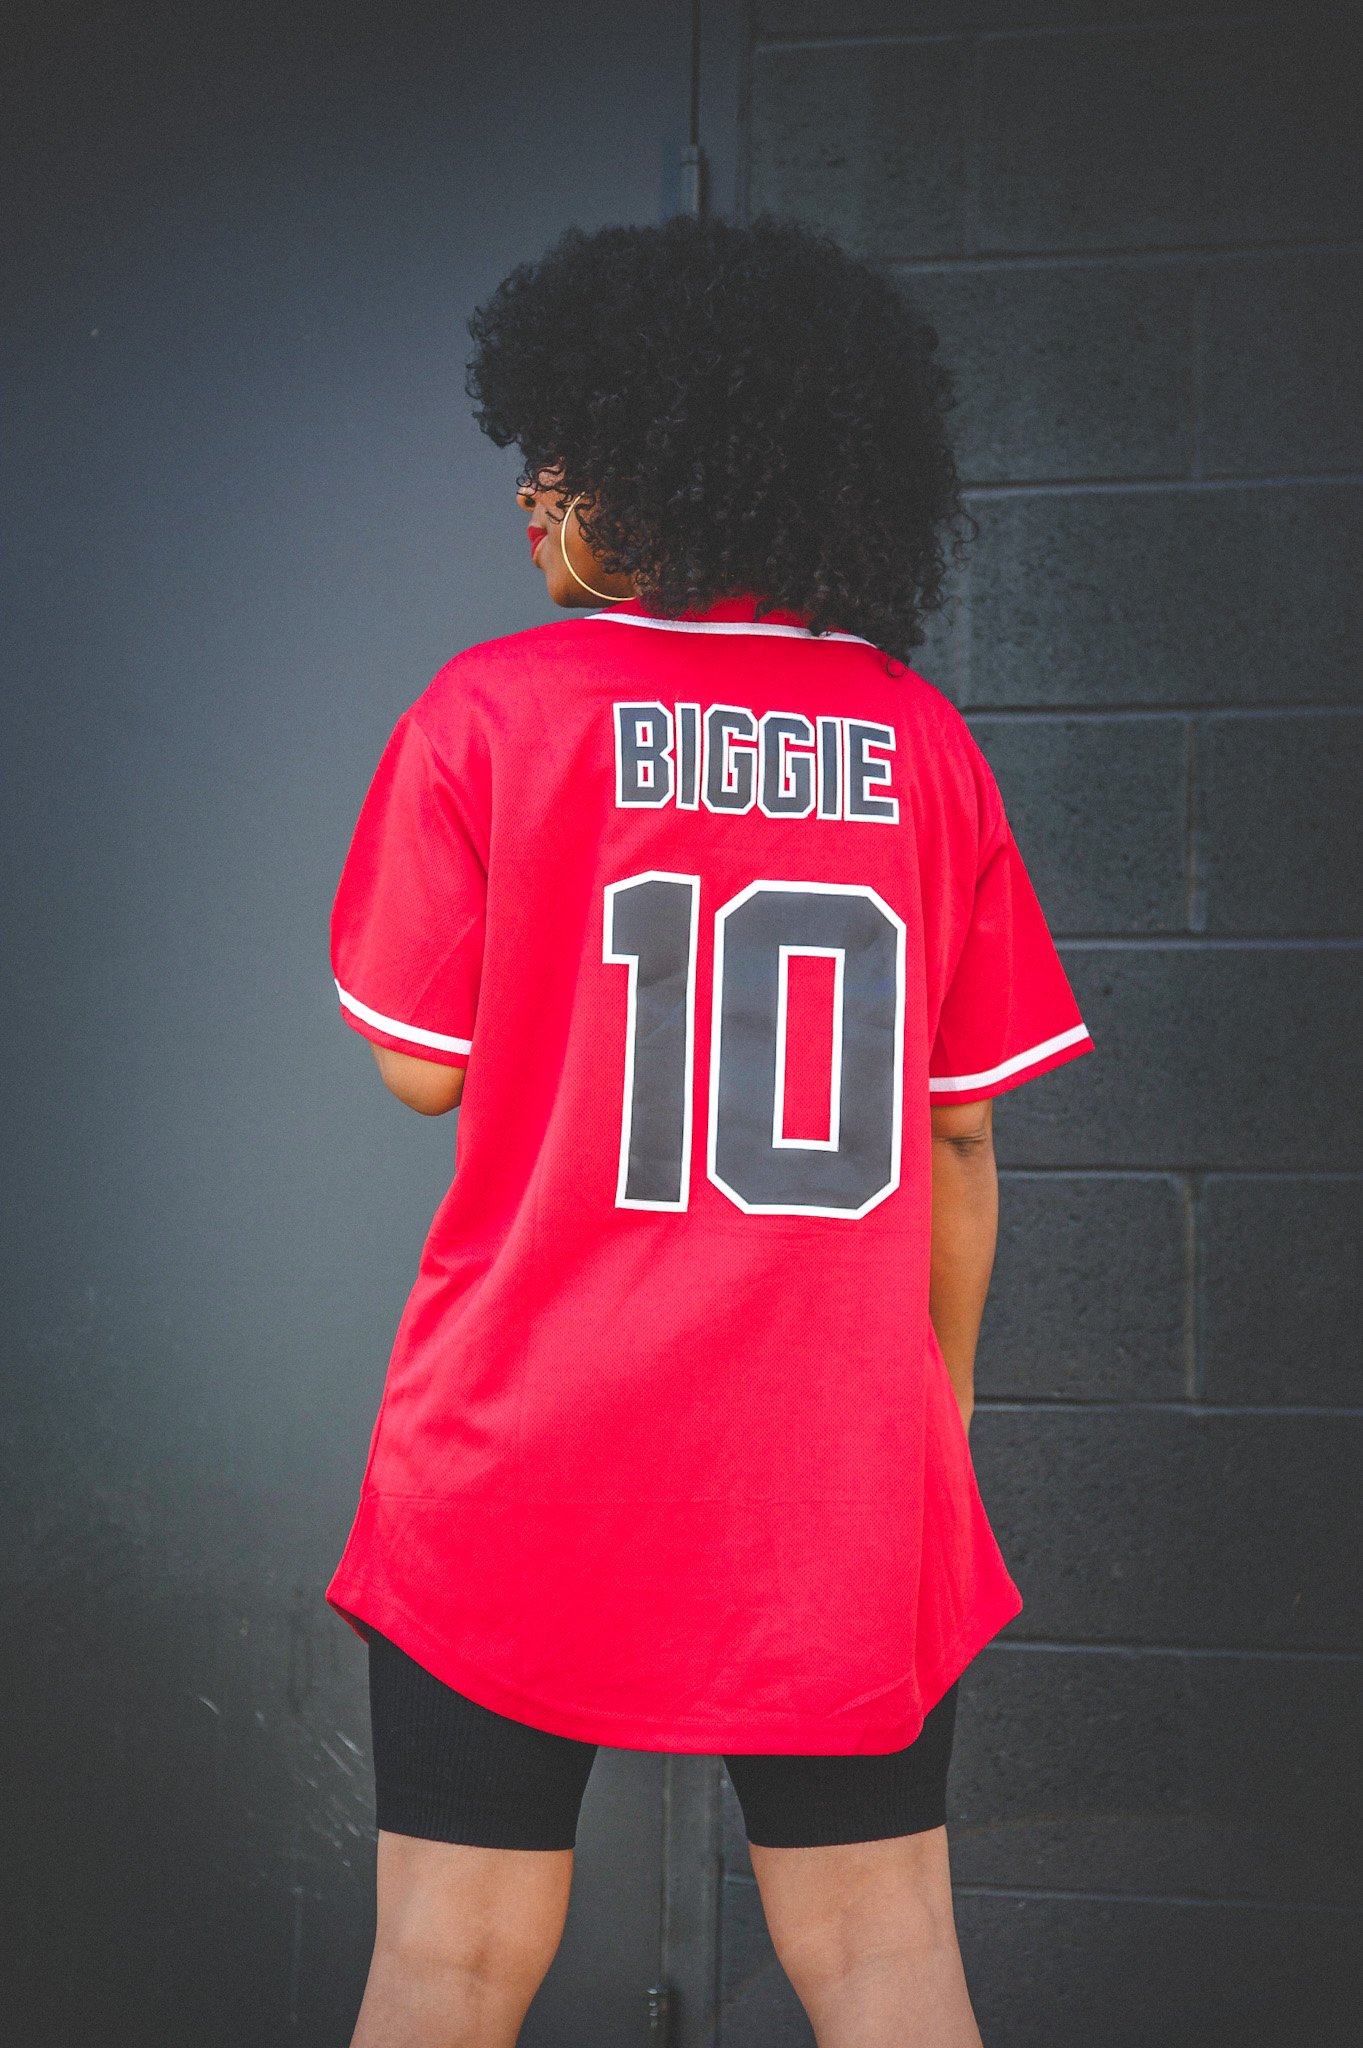 SWEENEE STYLE, STYLE INFLUENCER,5 RELAXING WEEKEND OUTFIT IDEAS, HOW TO STYLE FOR SUMMER, SUMMER OUTFIT IDEAS, HOW TO WEAR A JERSEY, BAD BOY JERSEY, BIGGIE JERSEY, AMAZON FASHION